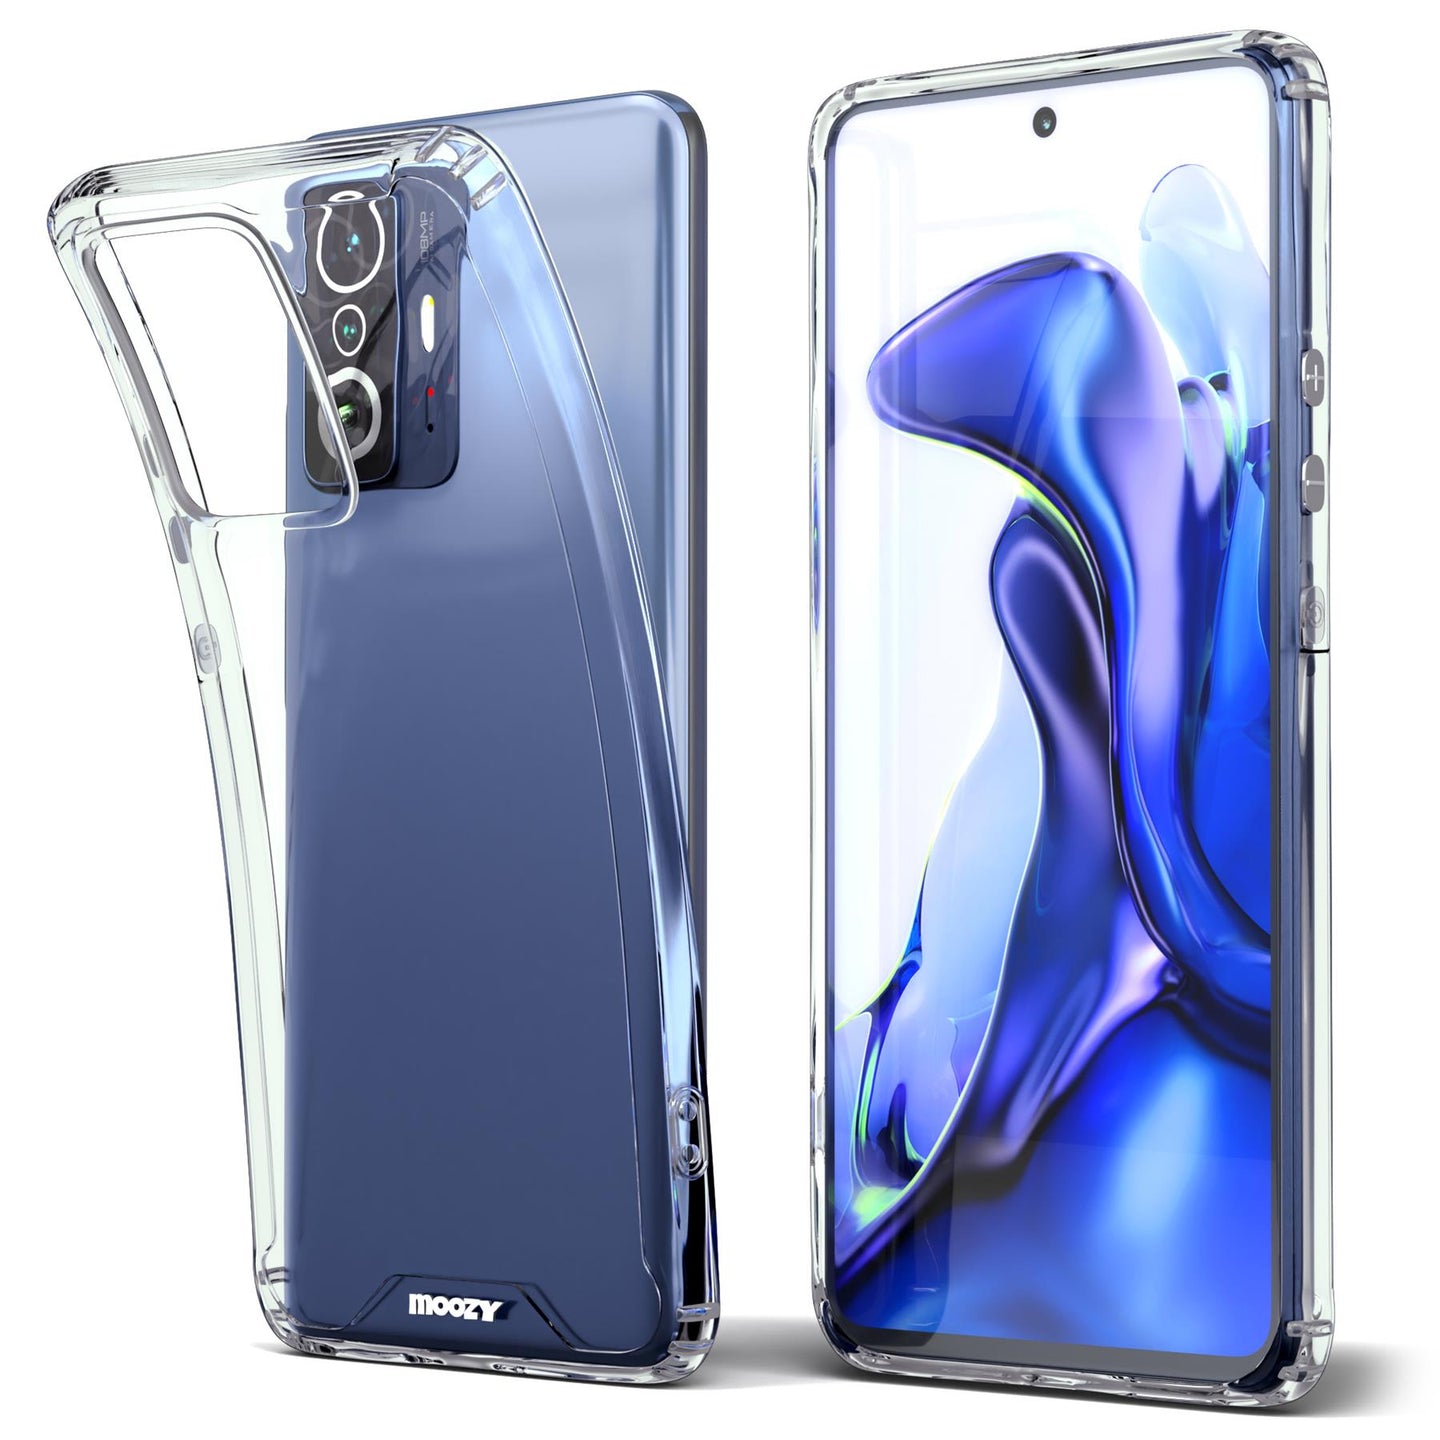 Moozy Xframe Shockproof Case for Xiaomi 11T and Xiaomi 11T Pro - Transparent Rim Case, Double Colour Clear Hybrid Cover with Shock Absorbing TPU Rim